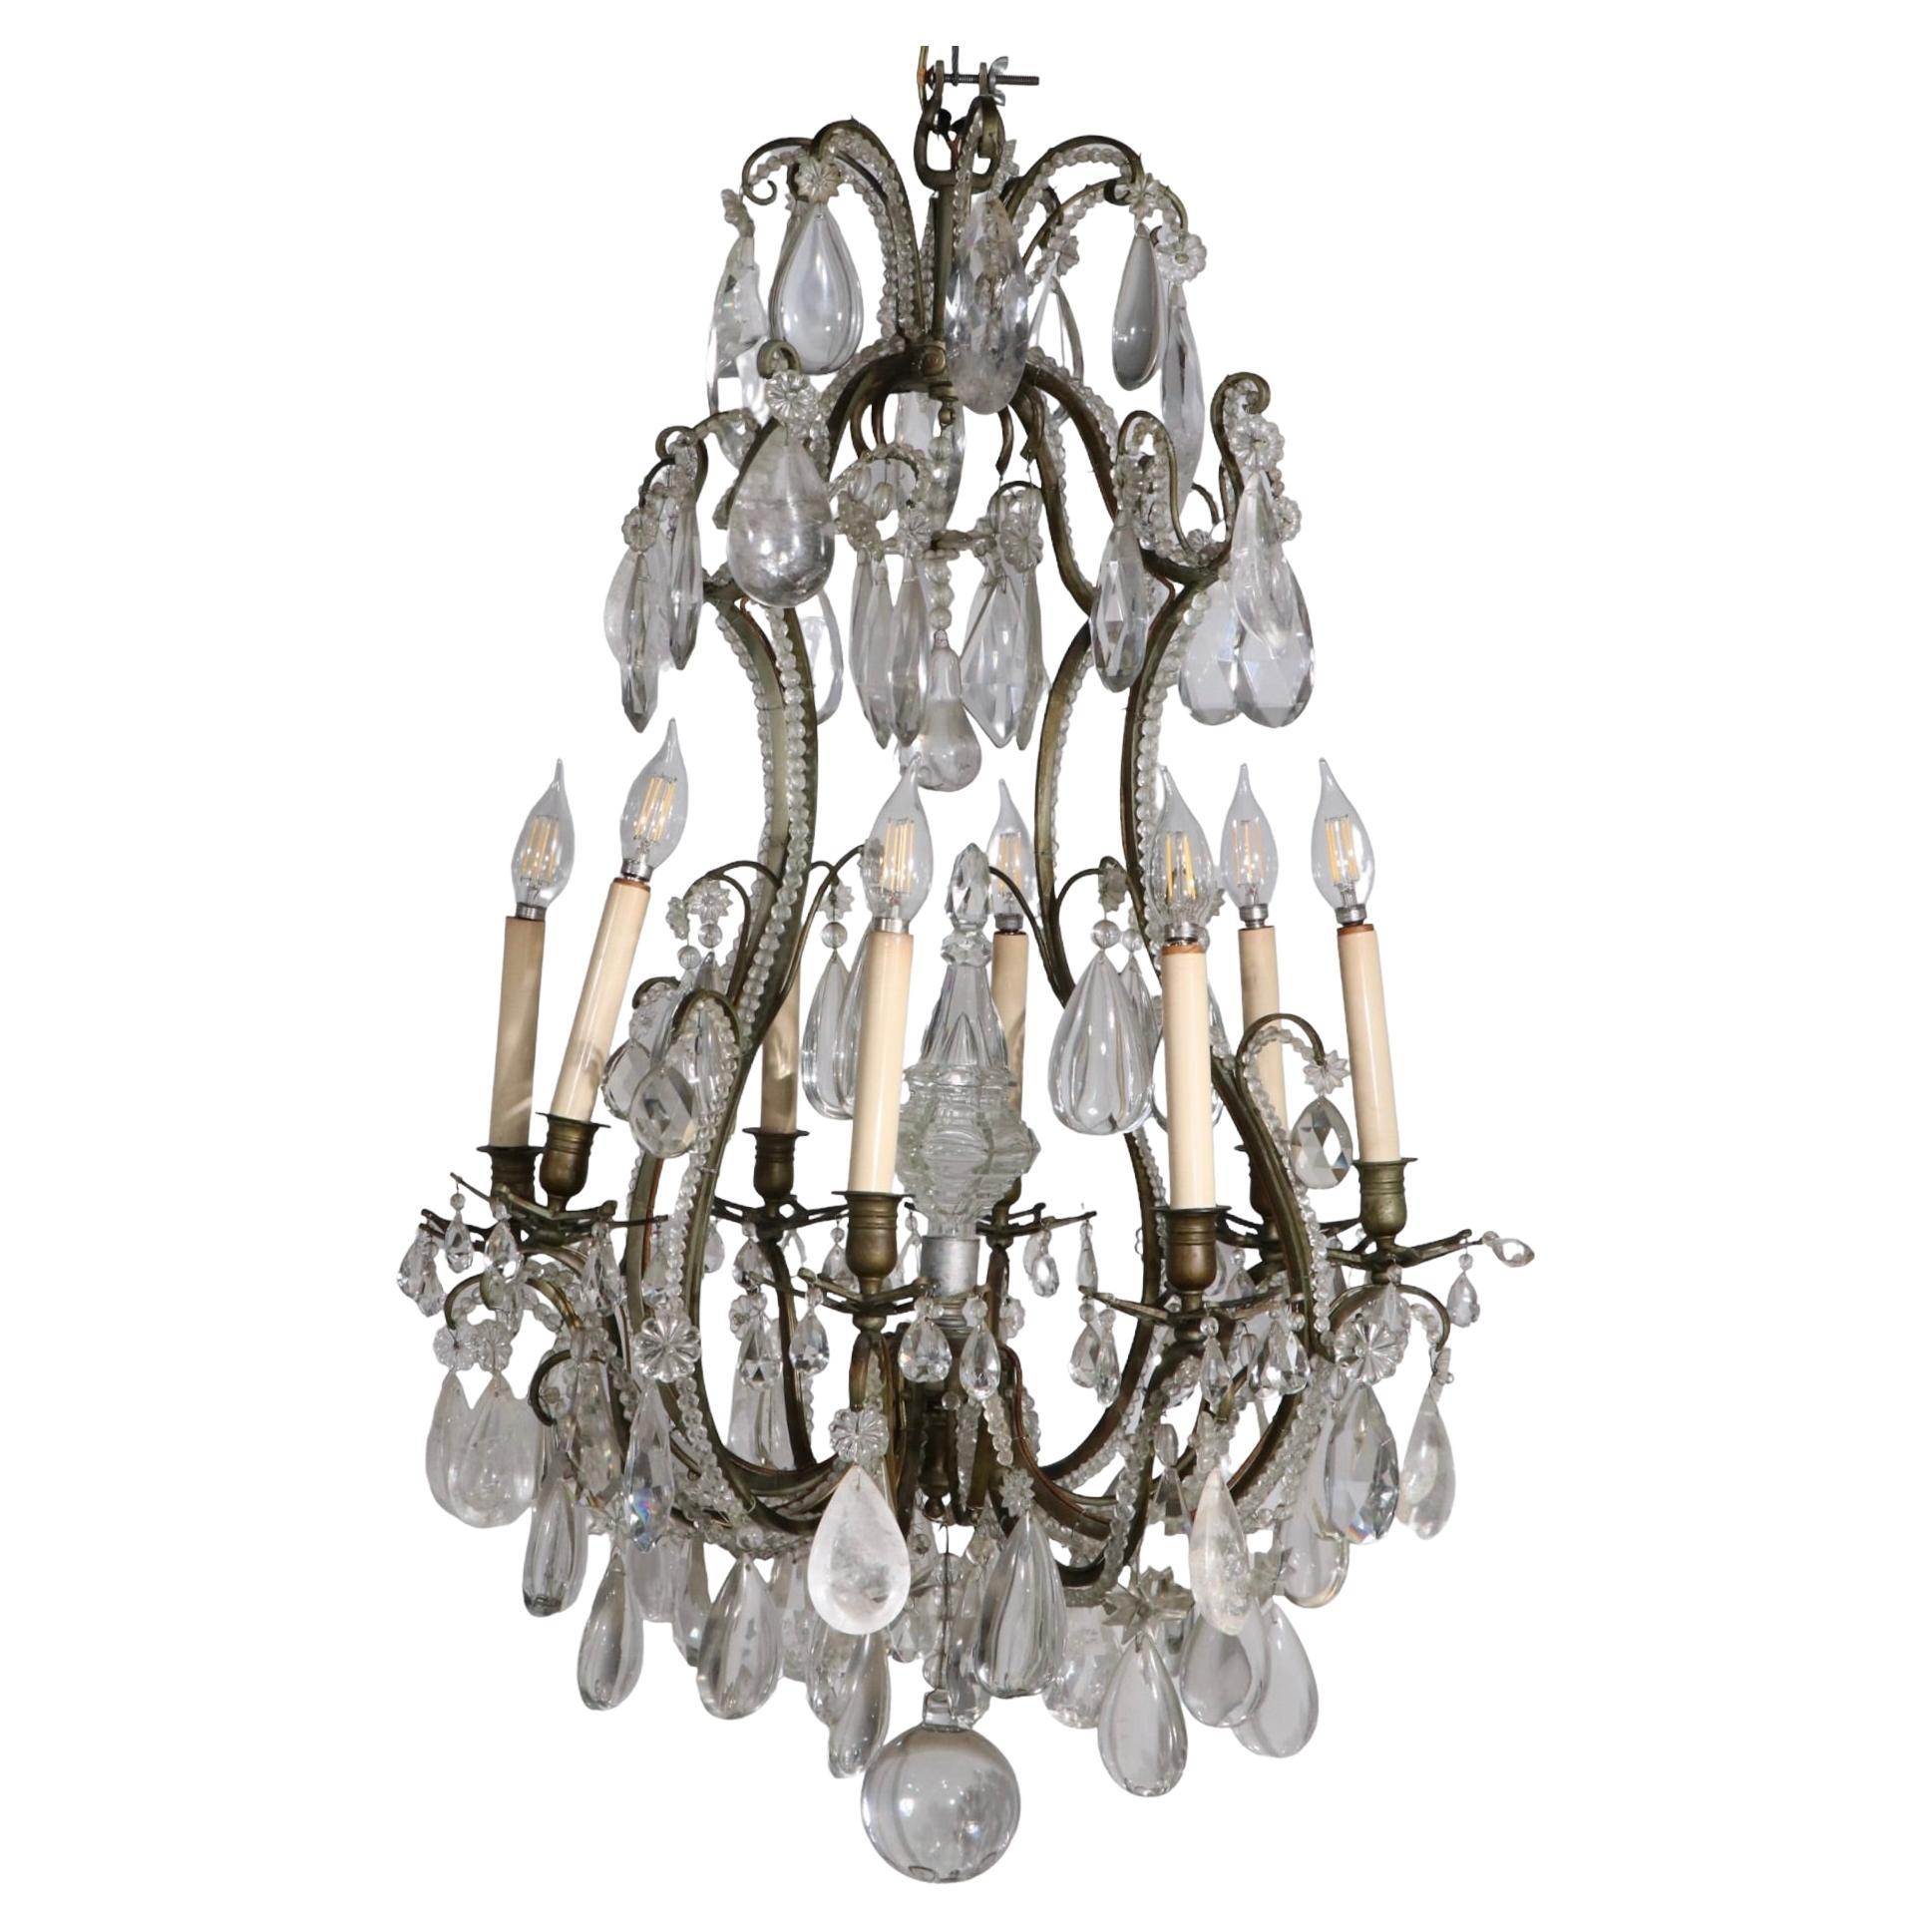 Formal Chandelier with Rock Crystal Drops by Charles J. Winston